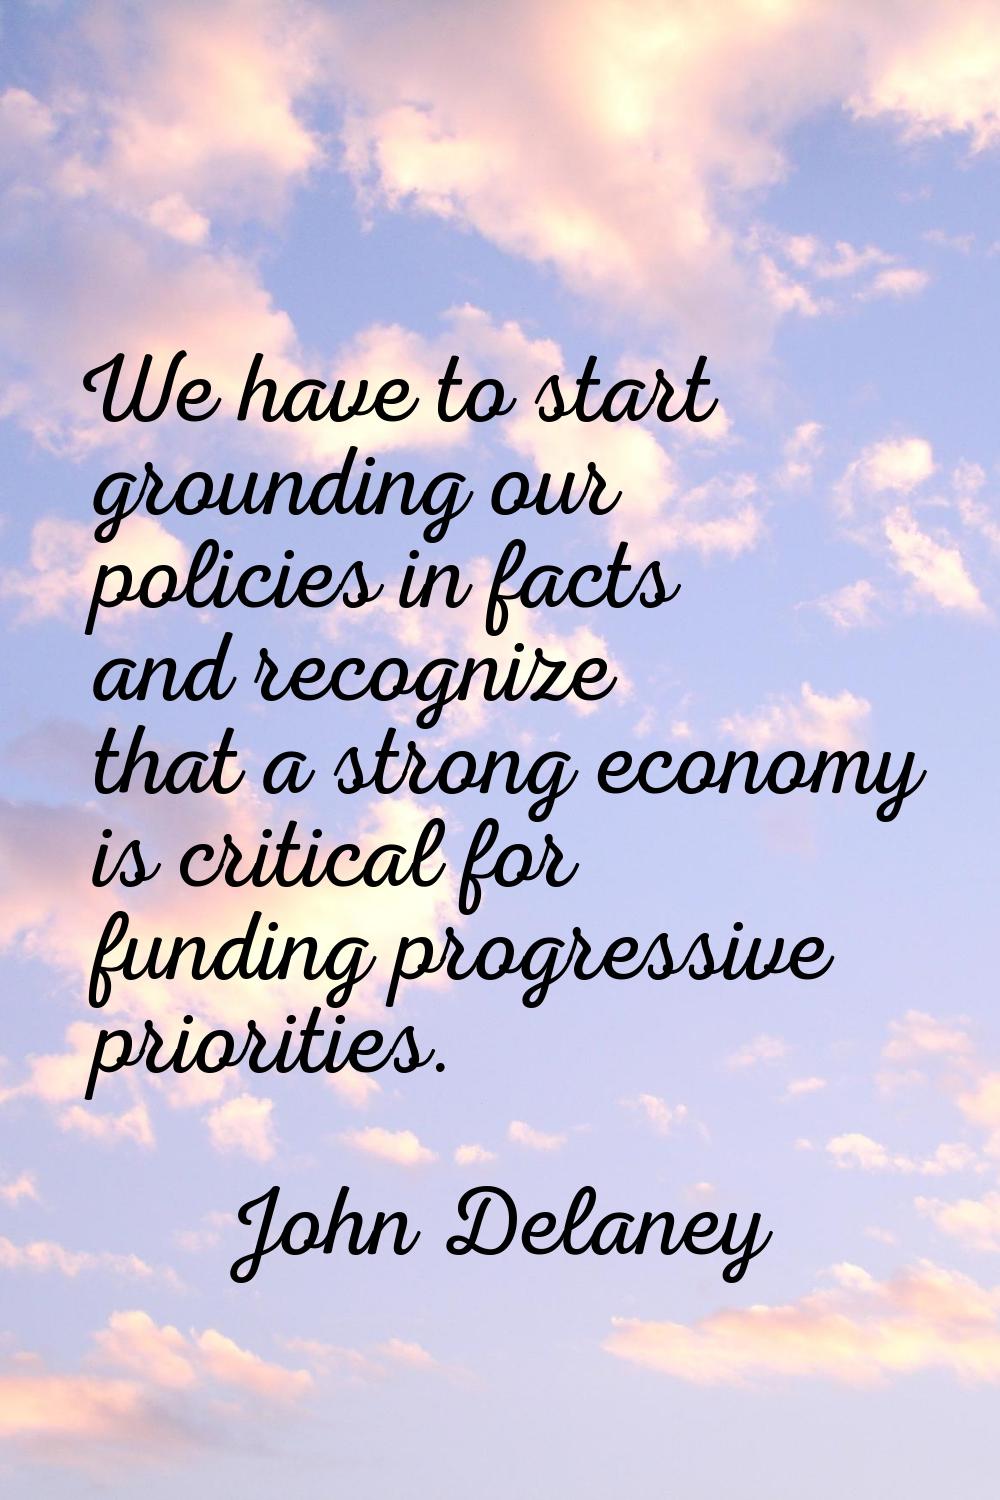 We have to start grounding our policies in facts and recognize that a strong economy is critical fo